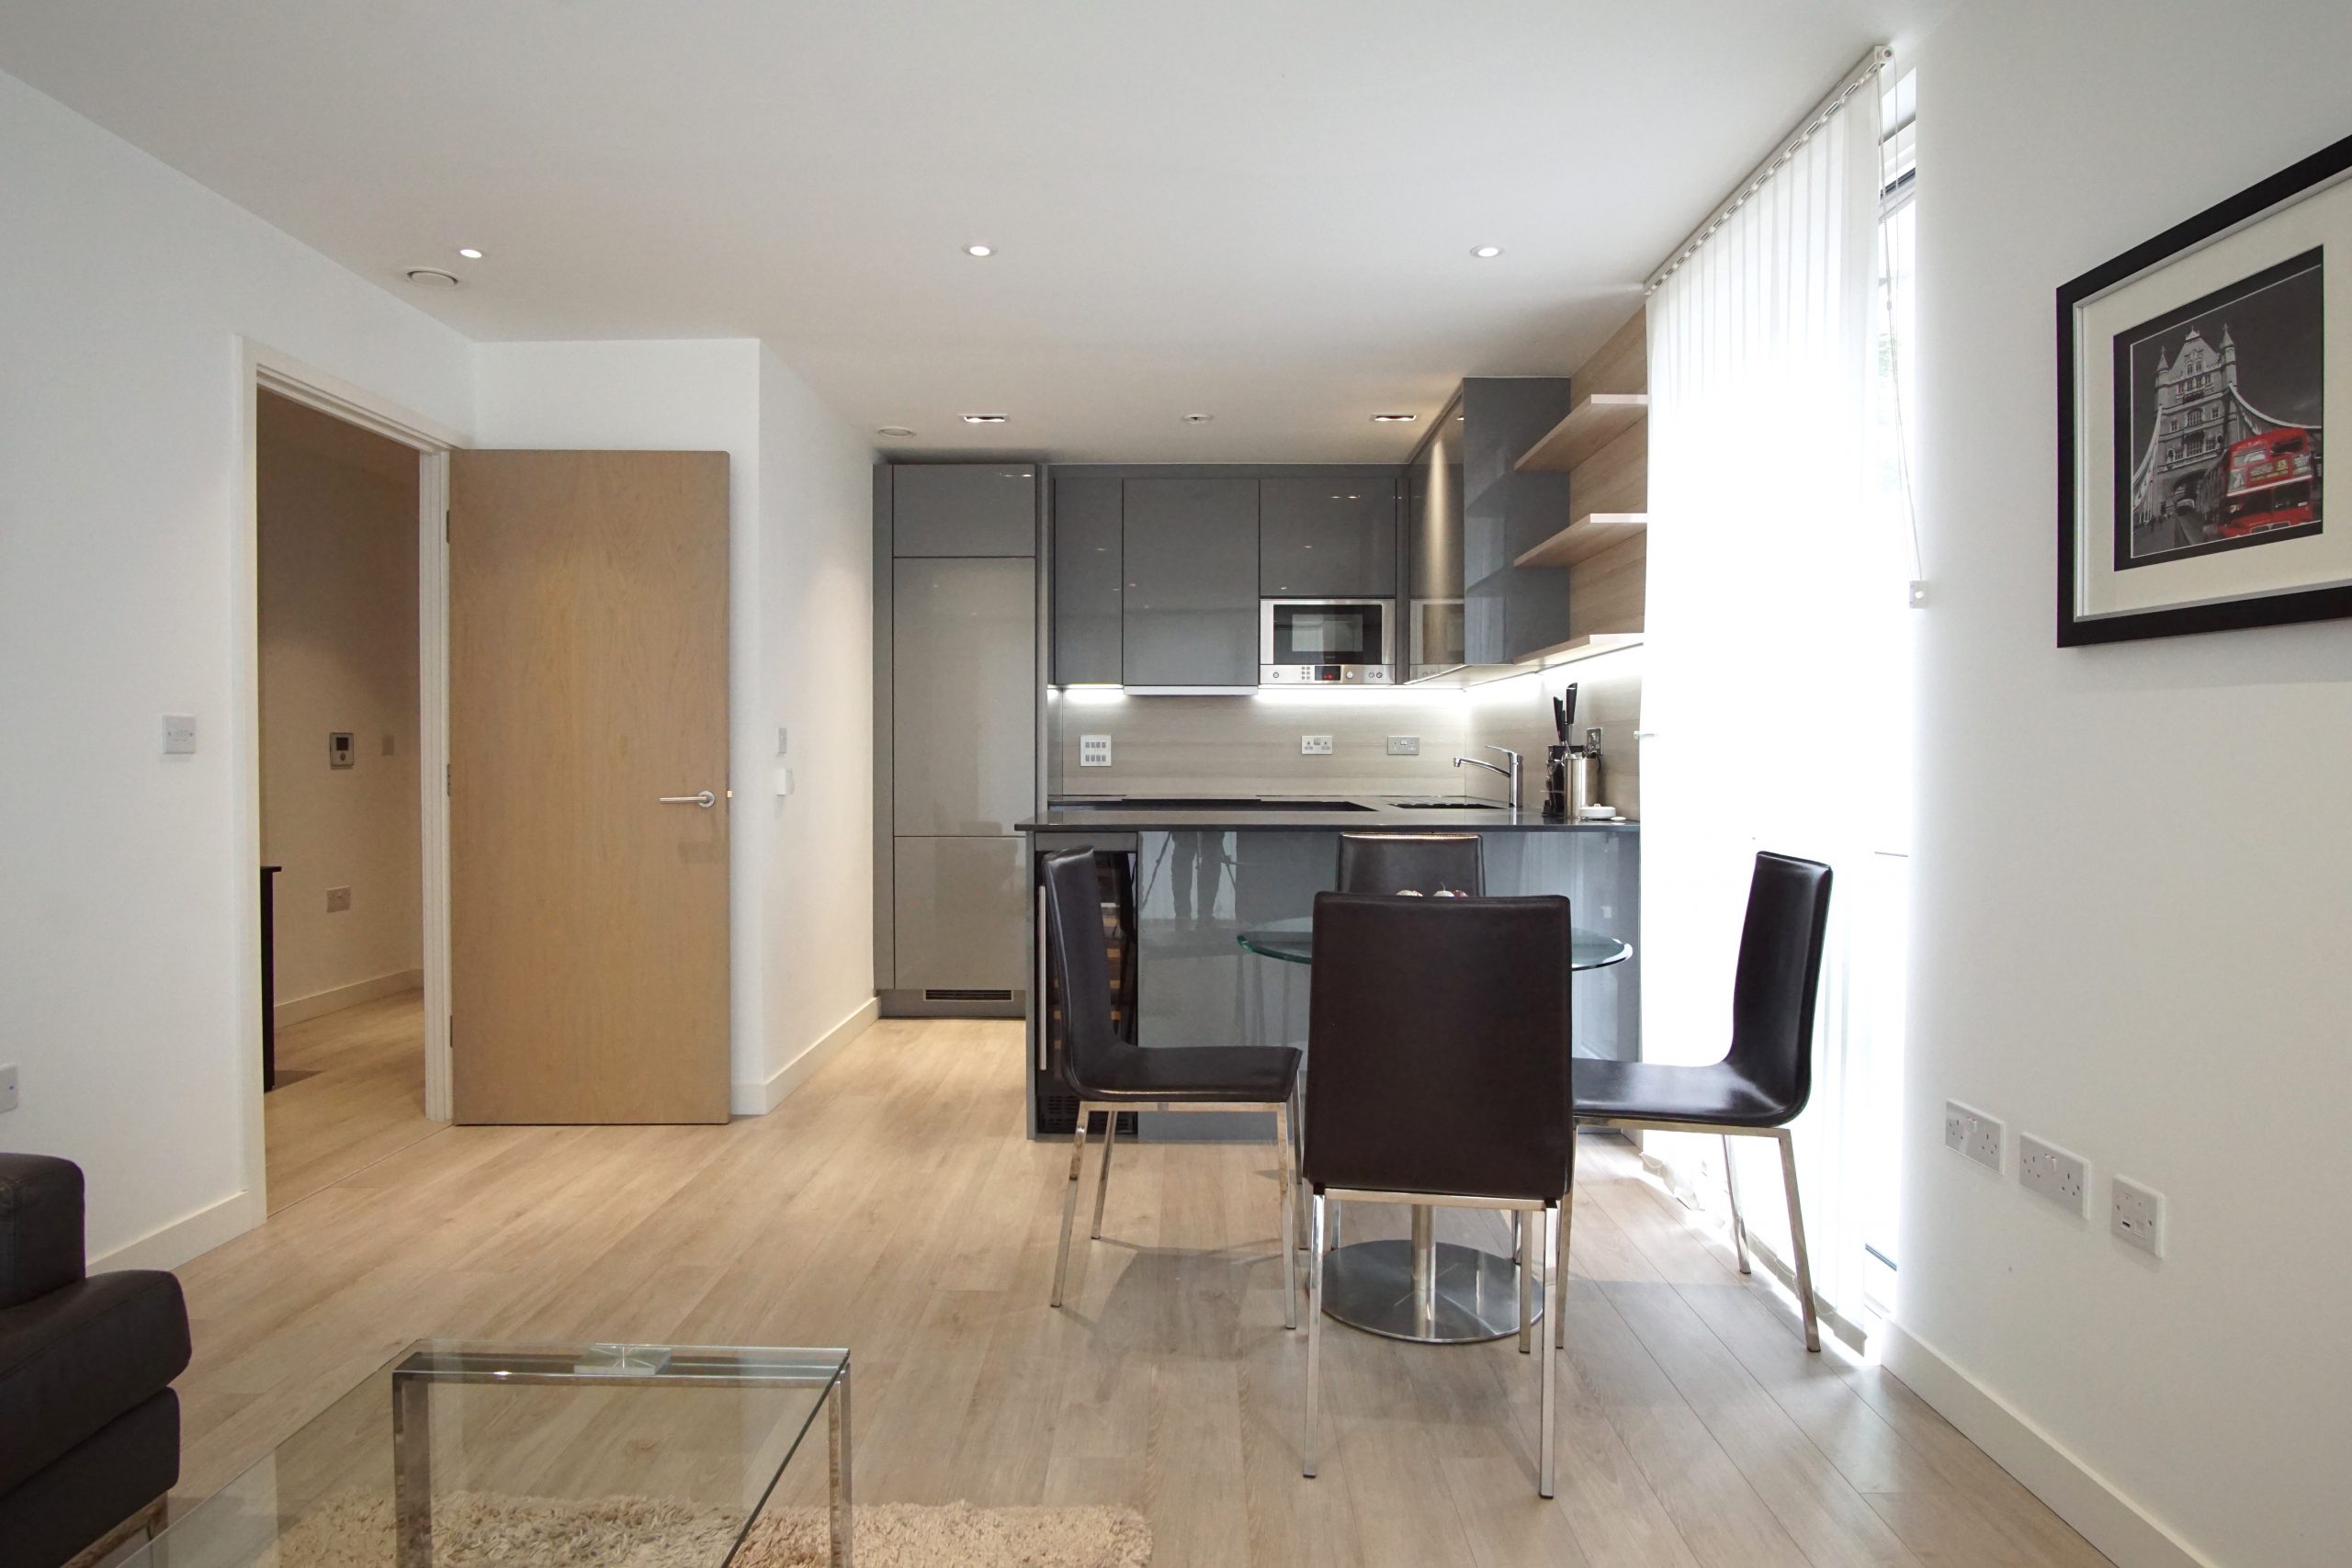 City View Apartments Woodberry Down London N4 Real Estate Sales And Lettings Services